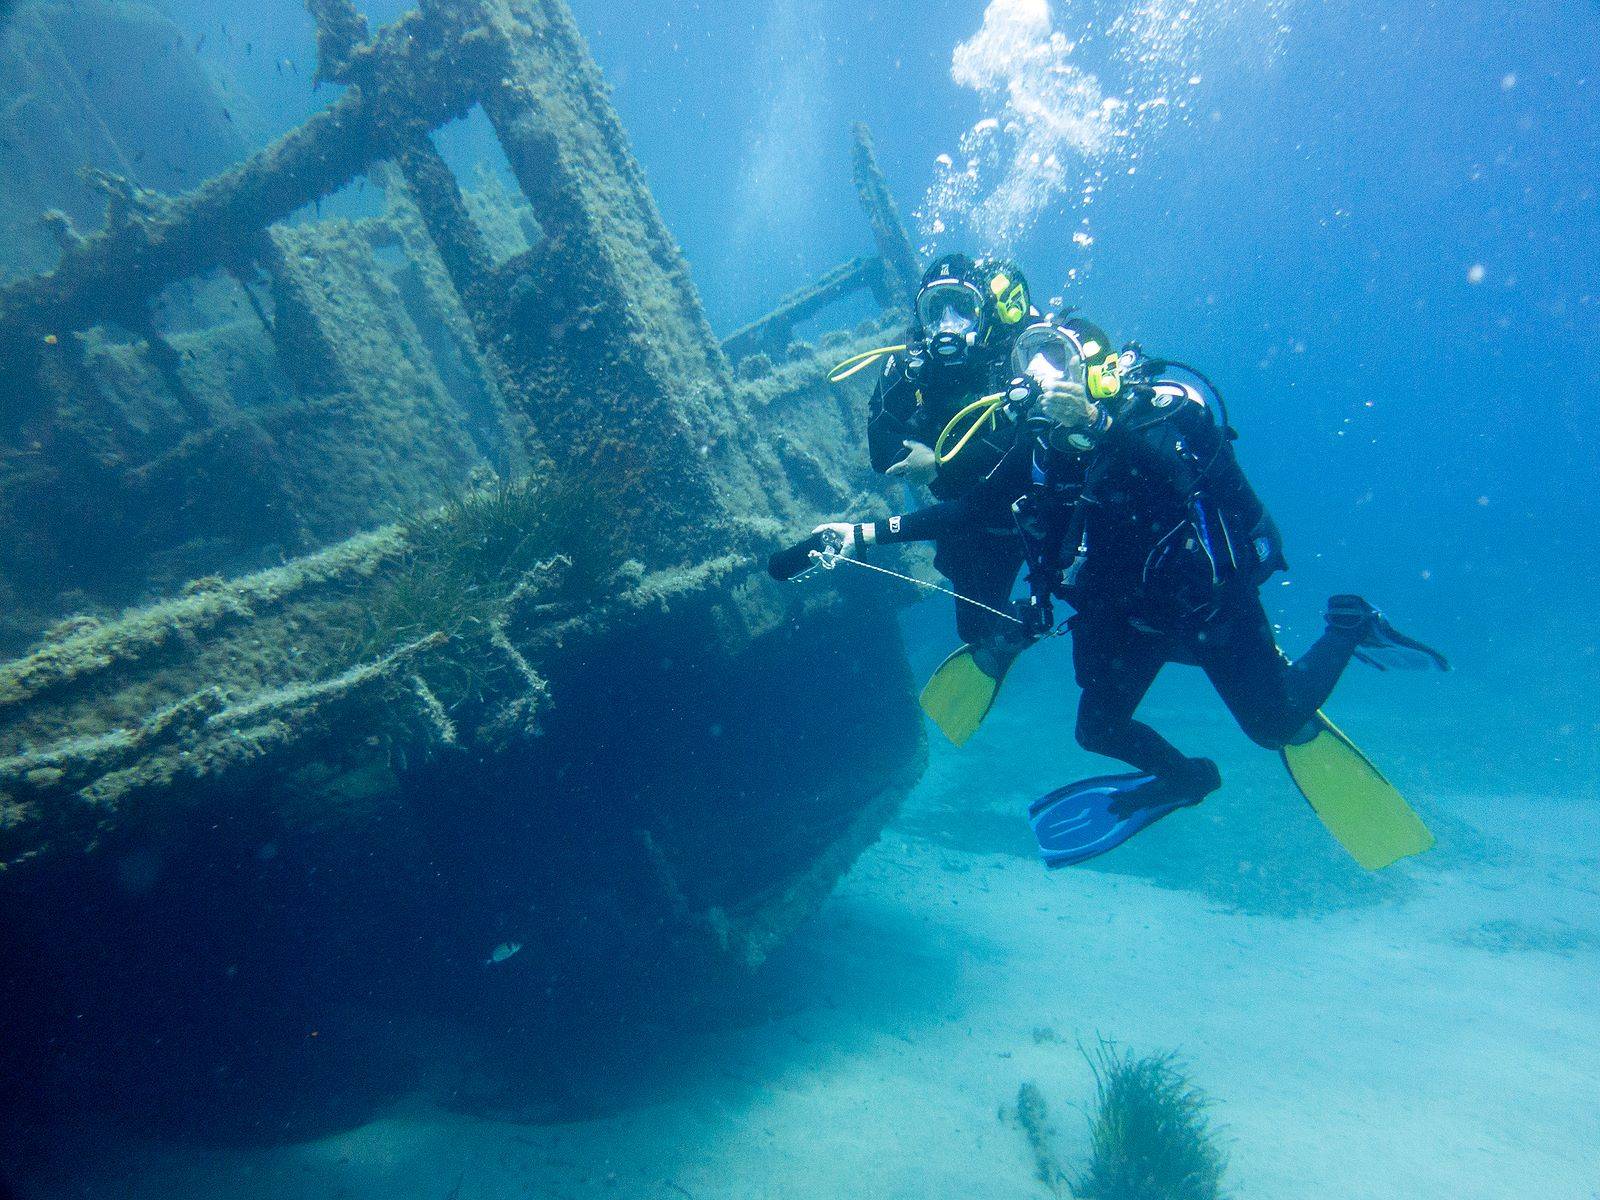 Vacancy Elite: The Fascinating Shipwrecks of Turks and Caicos - Totes ...